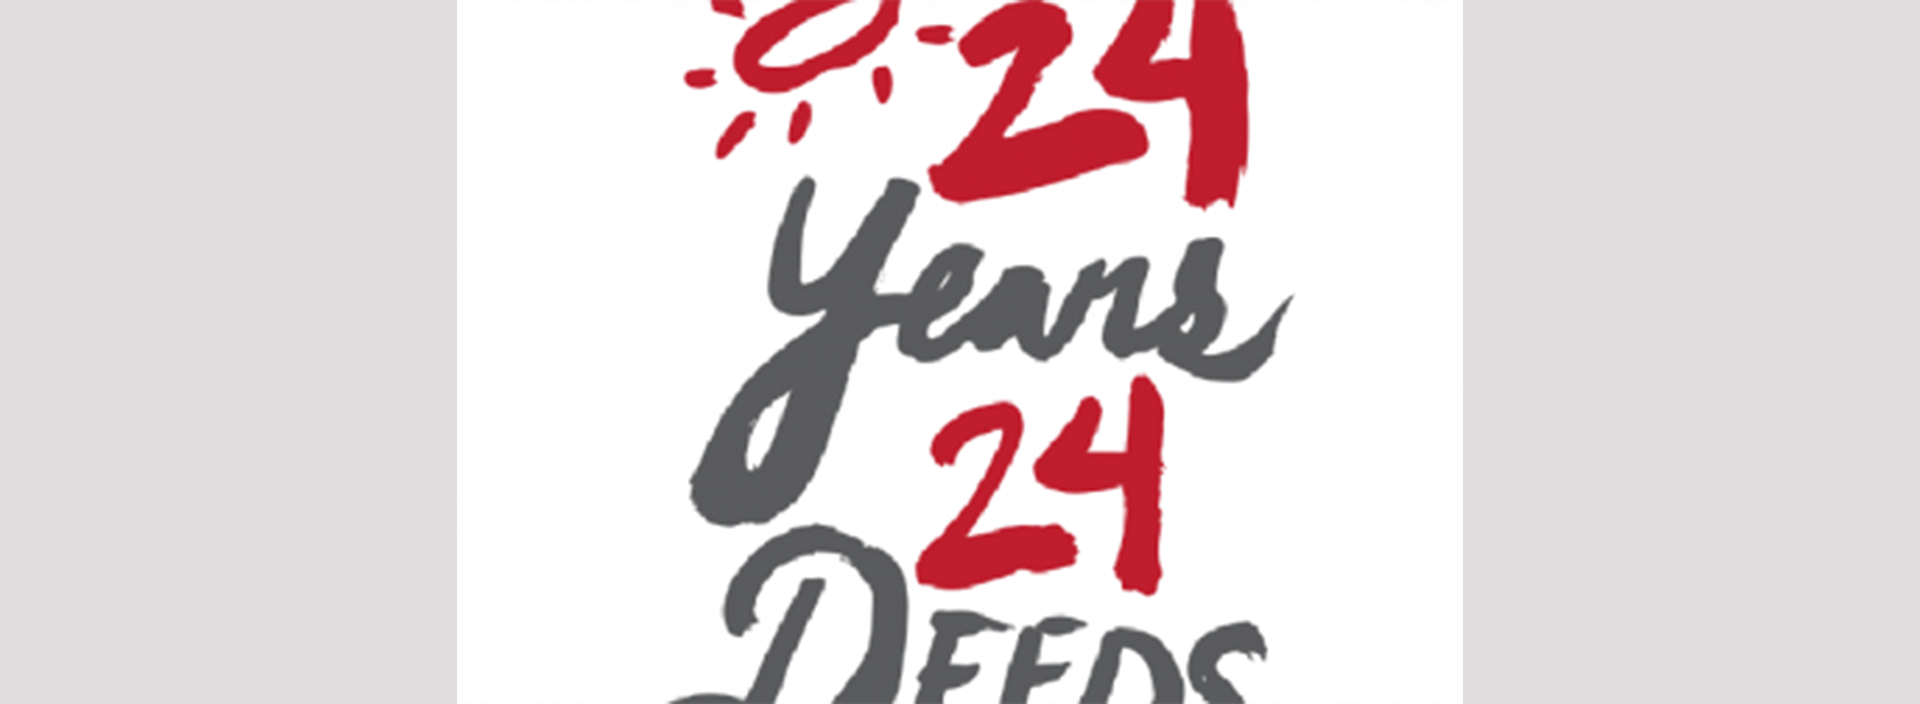 We Just Birthed a Hashtag: Welcome to the World, #24Years24Deeds!